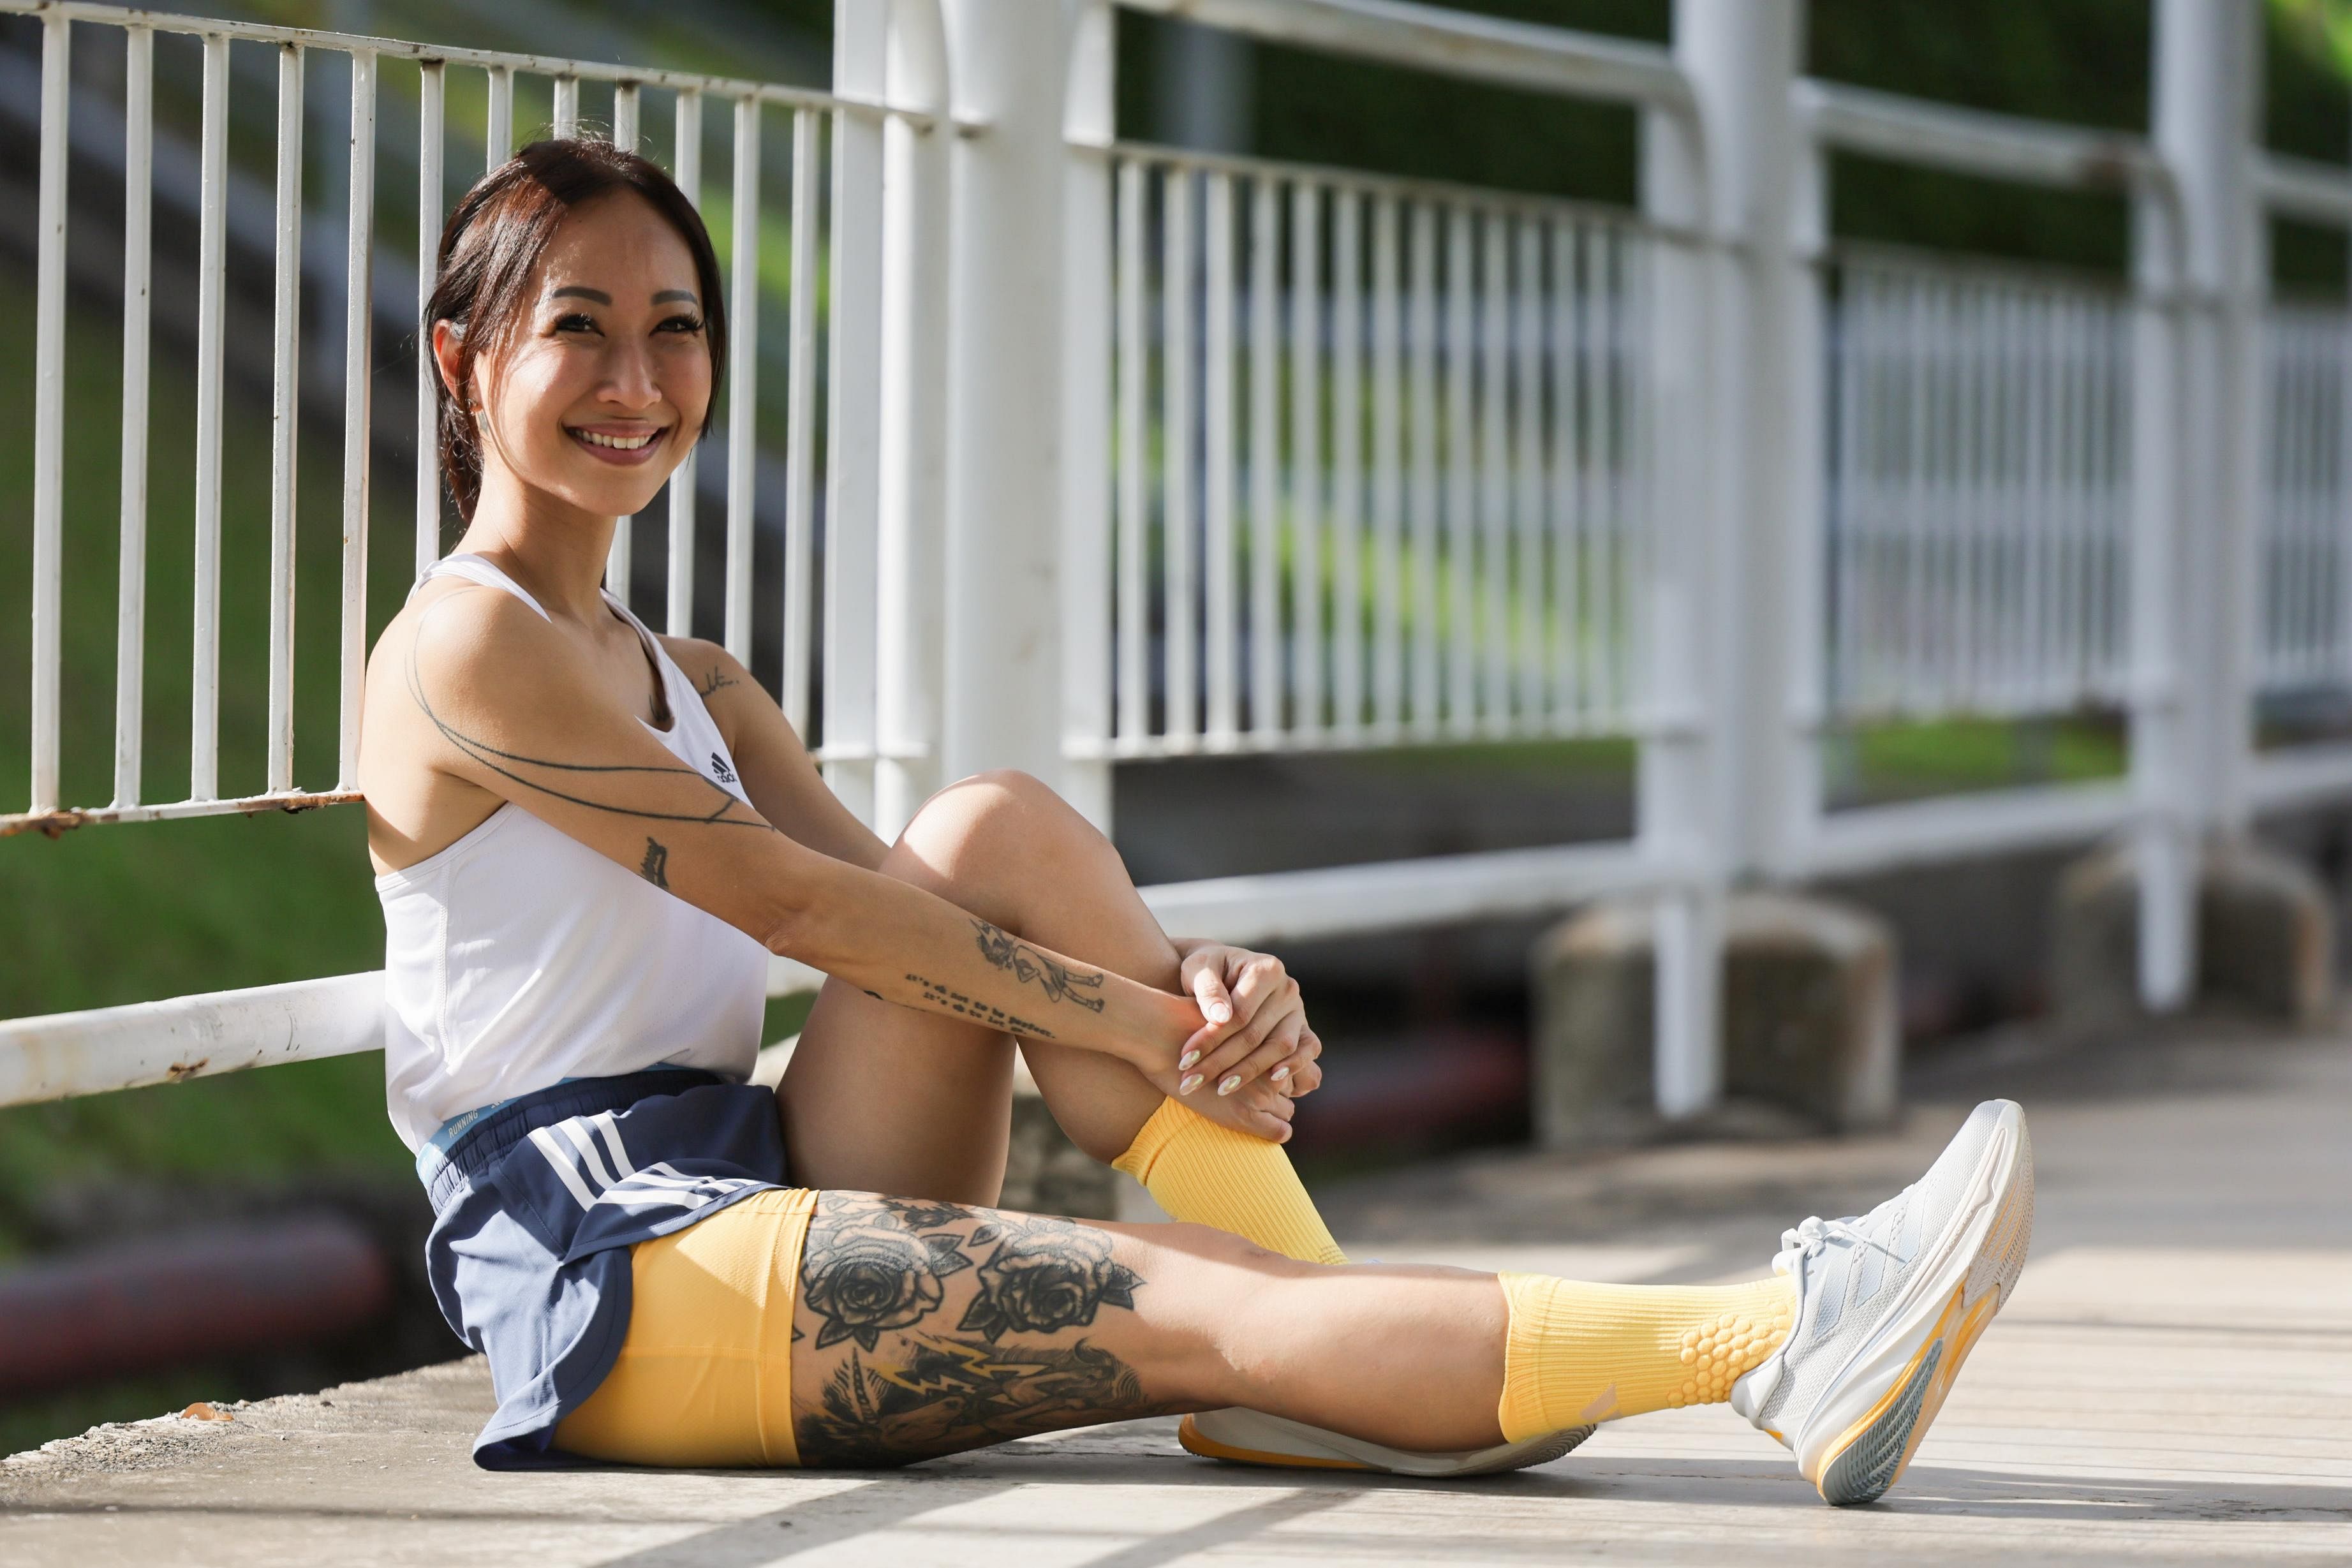 From non-sports lover to avid runner: Sofie Chandra hopes to inspire community